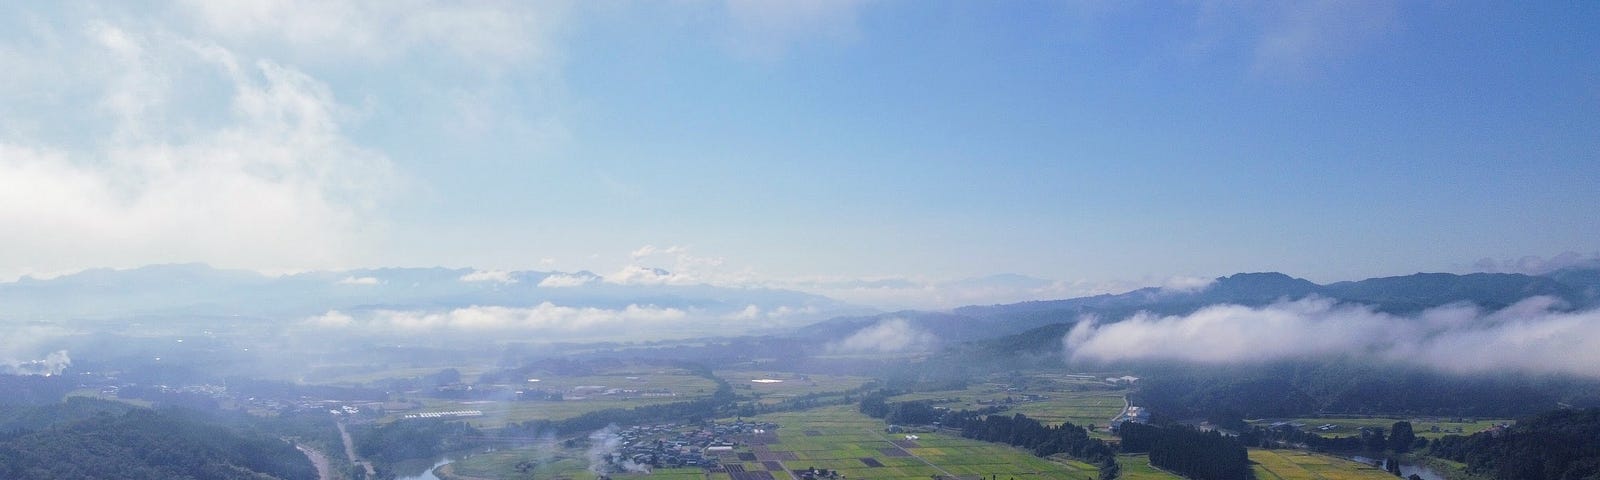 The Mogami River and Route 13 seen from Sabane-yama.